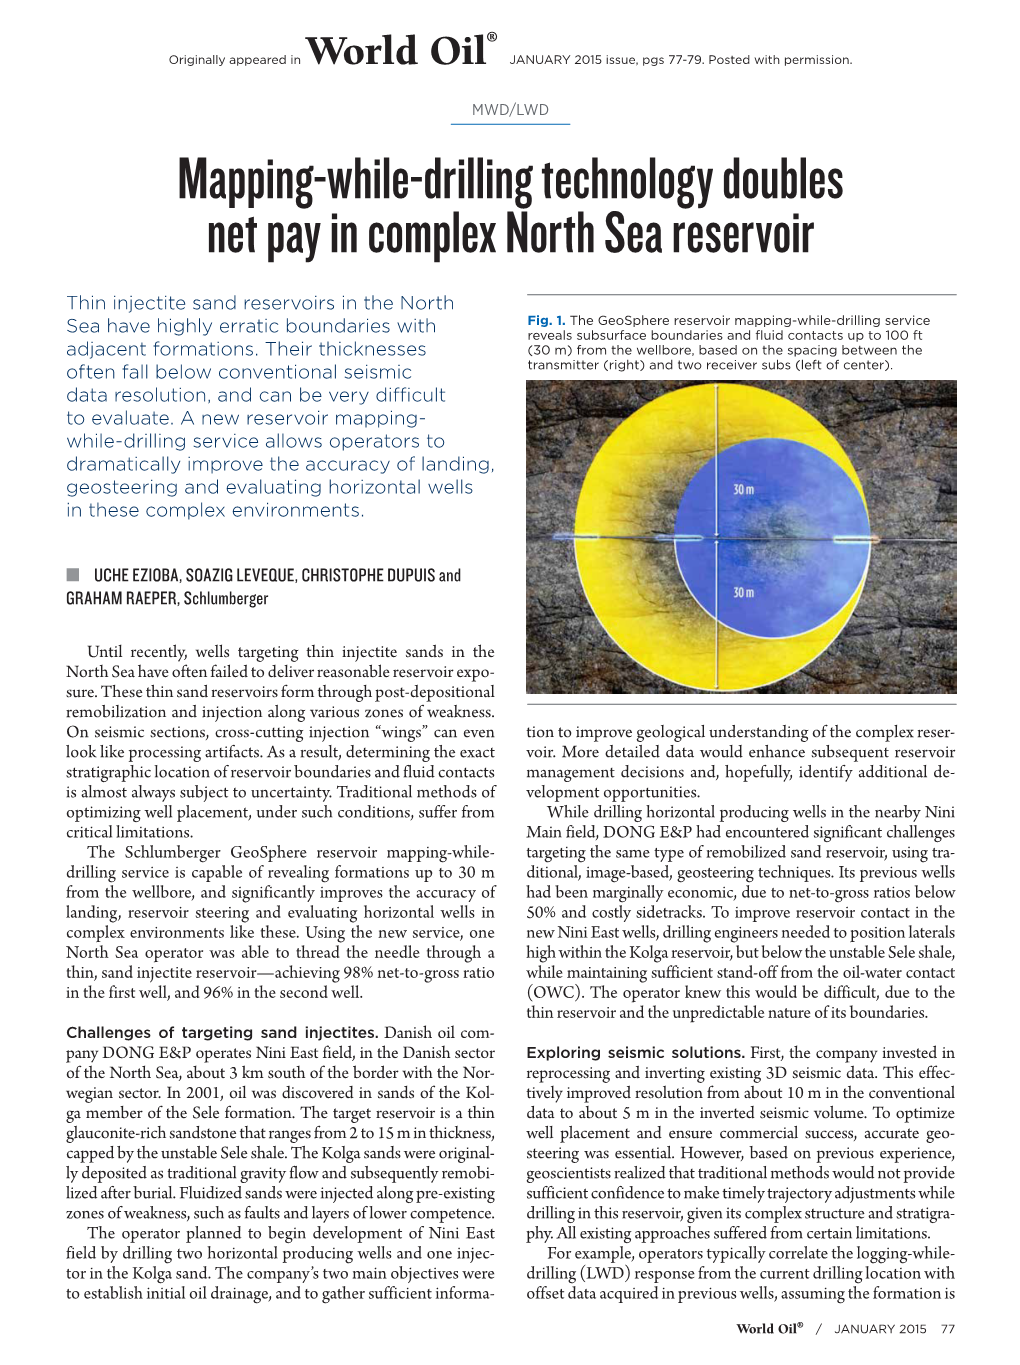 Mapping-While-Drilling Technology Doubles Net Pay in Complex North Sea Reservoir